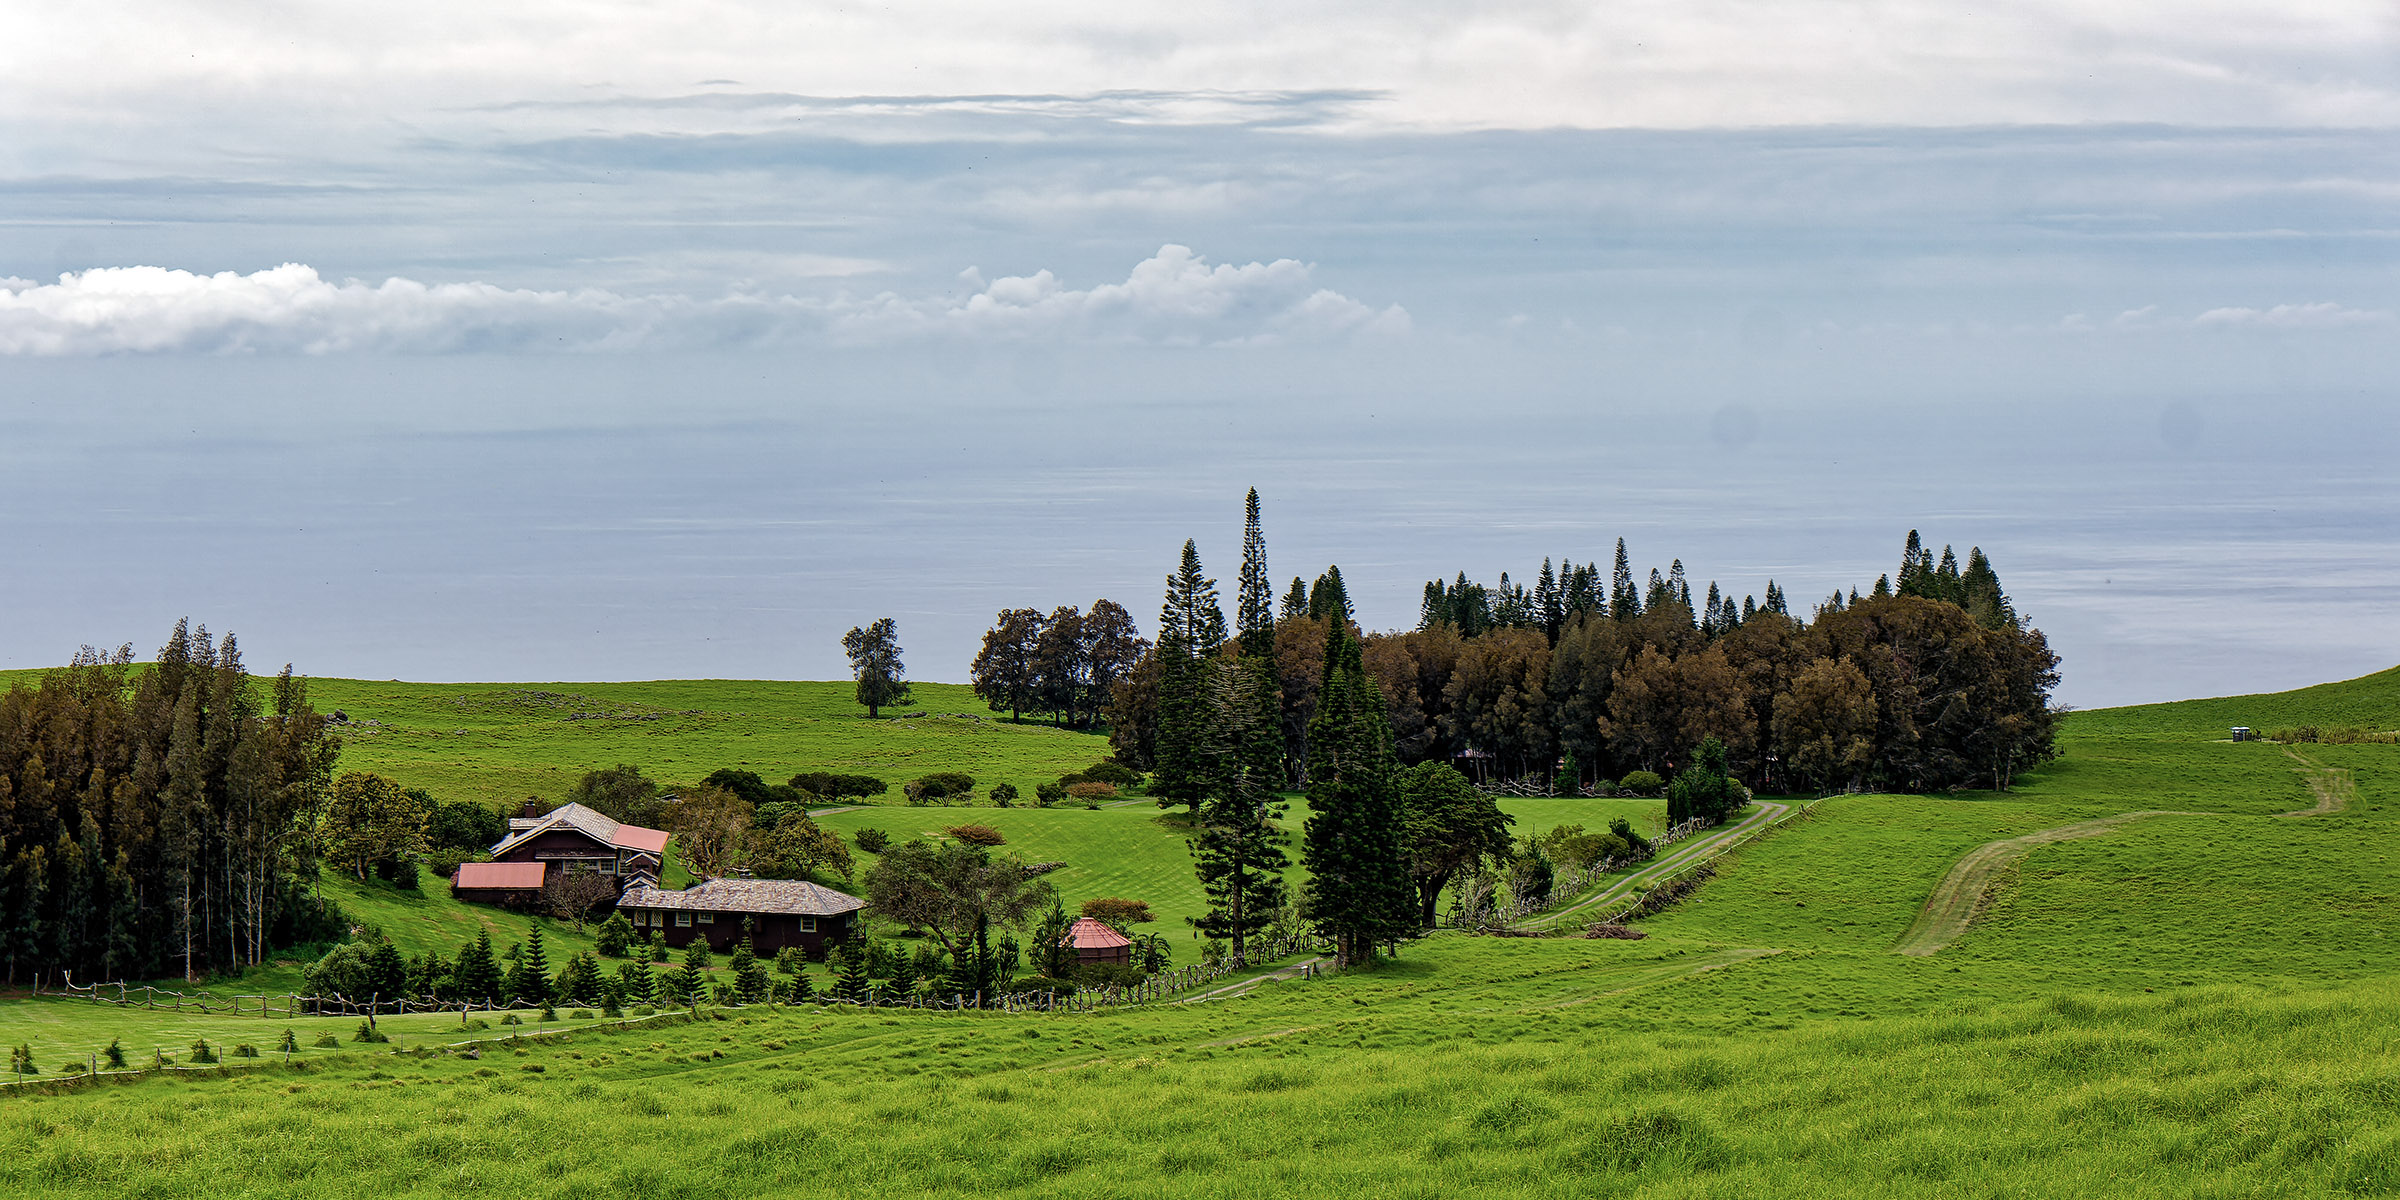 The ocean appears to seamlessly blend into the sky in this view from a lookout on Kohala Mountain Road